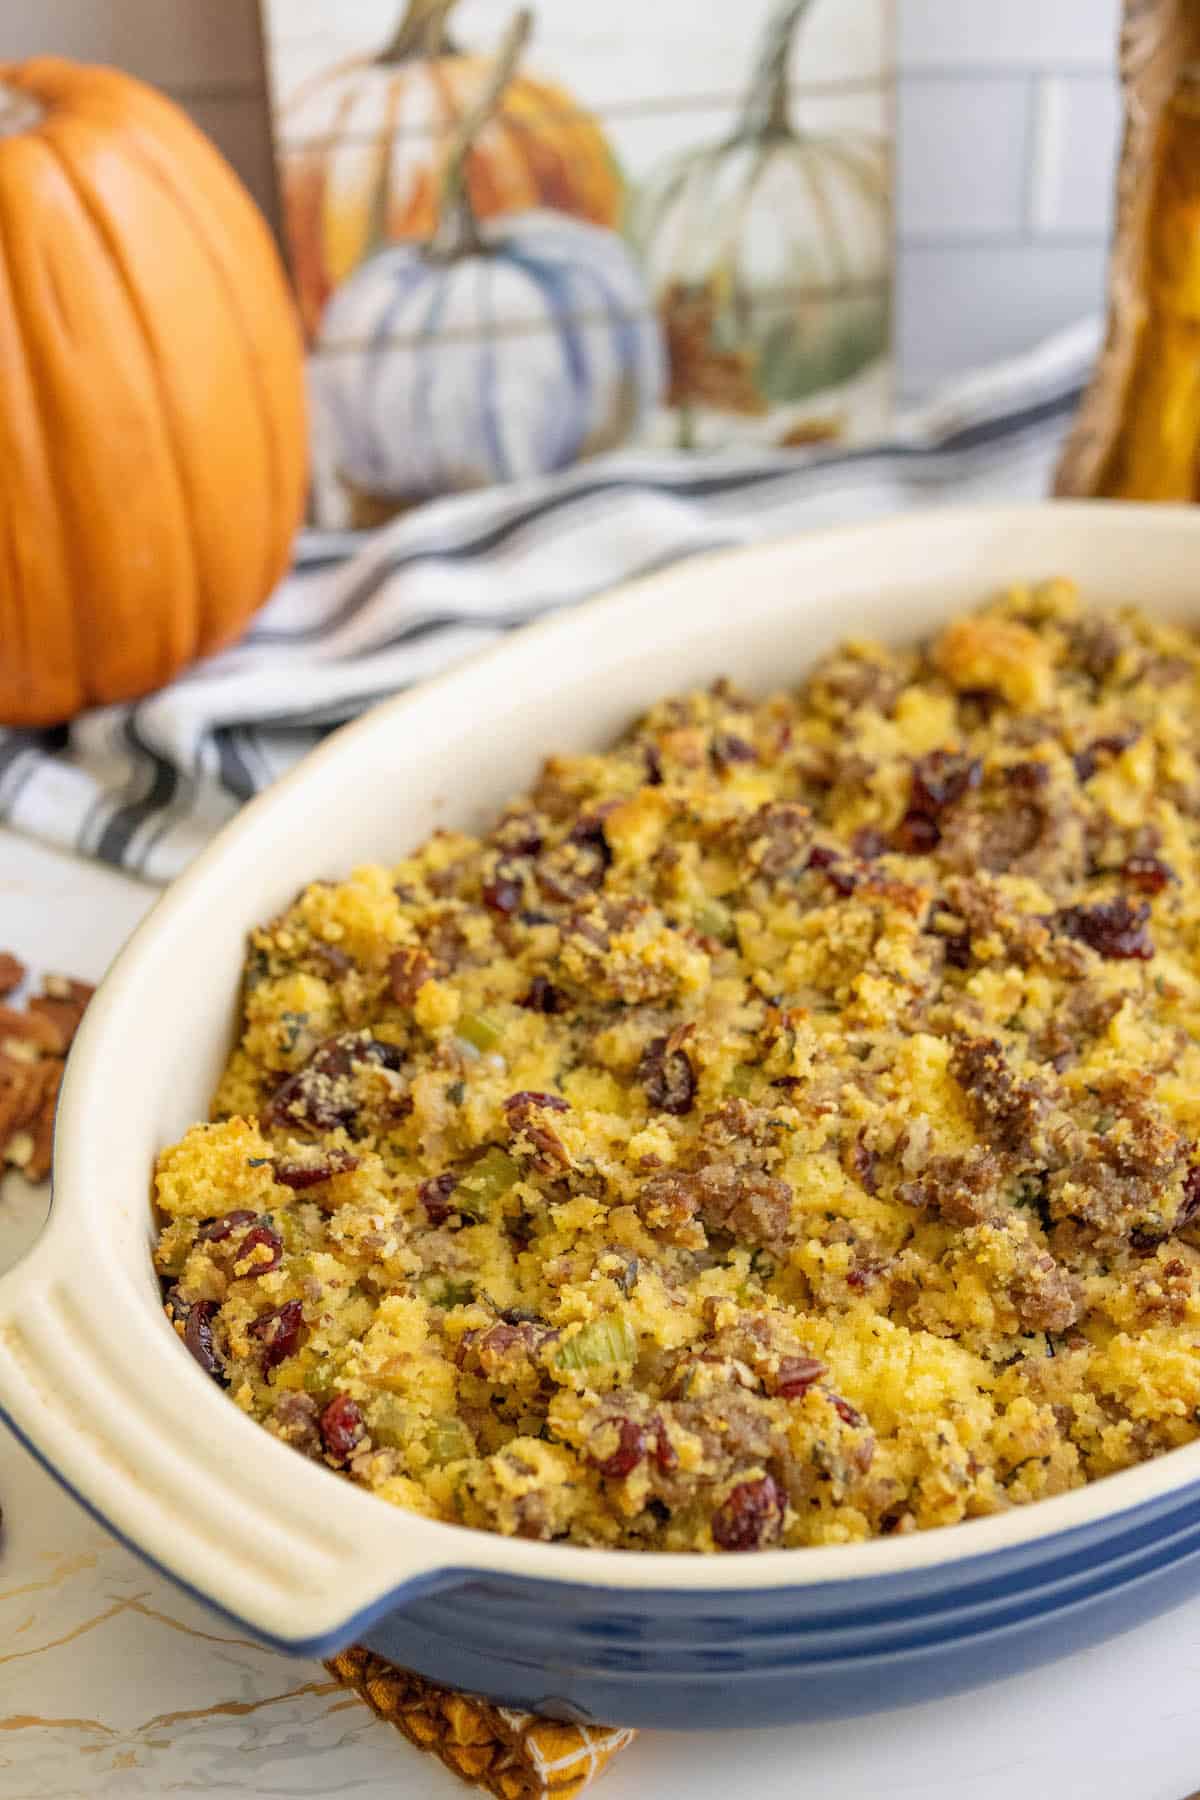 A dish of cornbread stuffing on a table with pumpkins and cranberries.